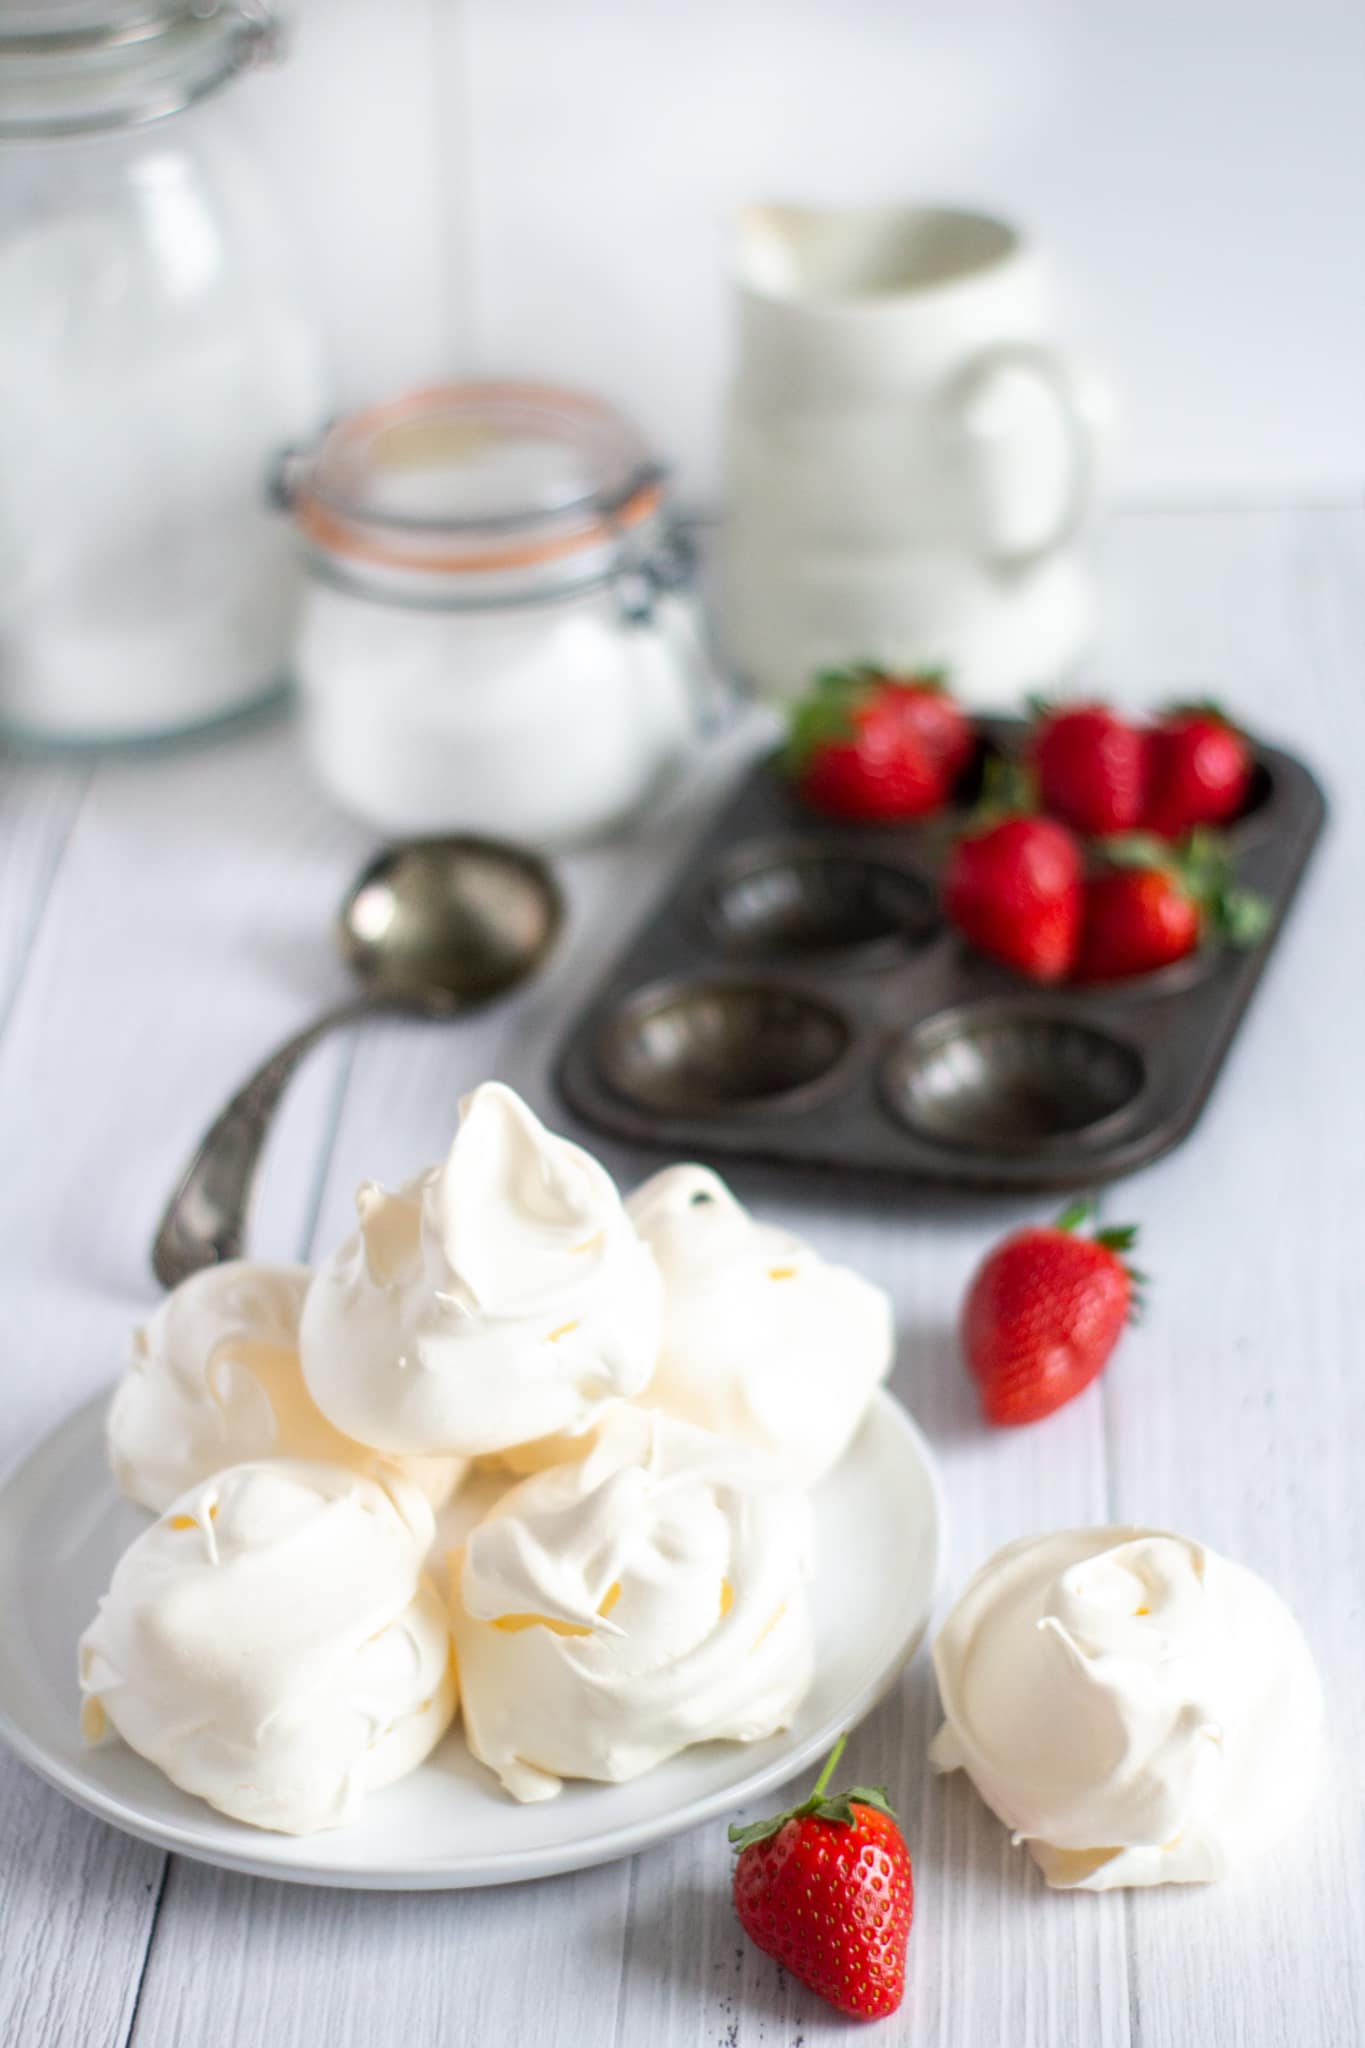 meringues on a plate with strawberries with a metal baking tray behind with sugar pots and a cream jug